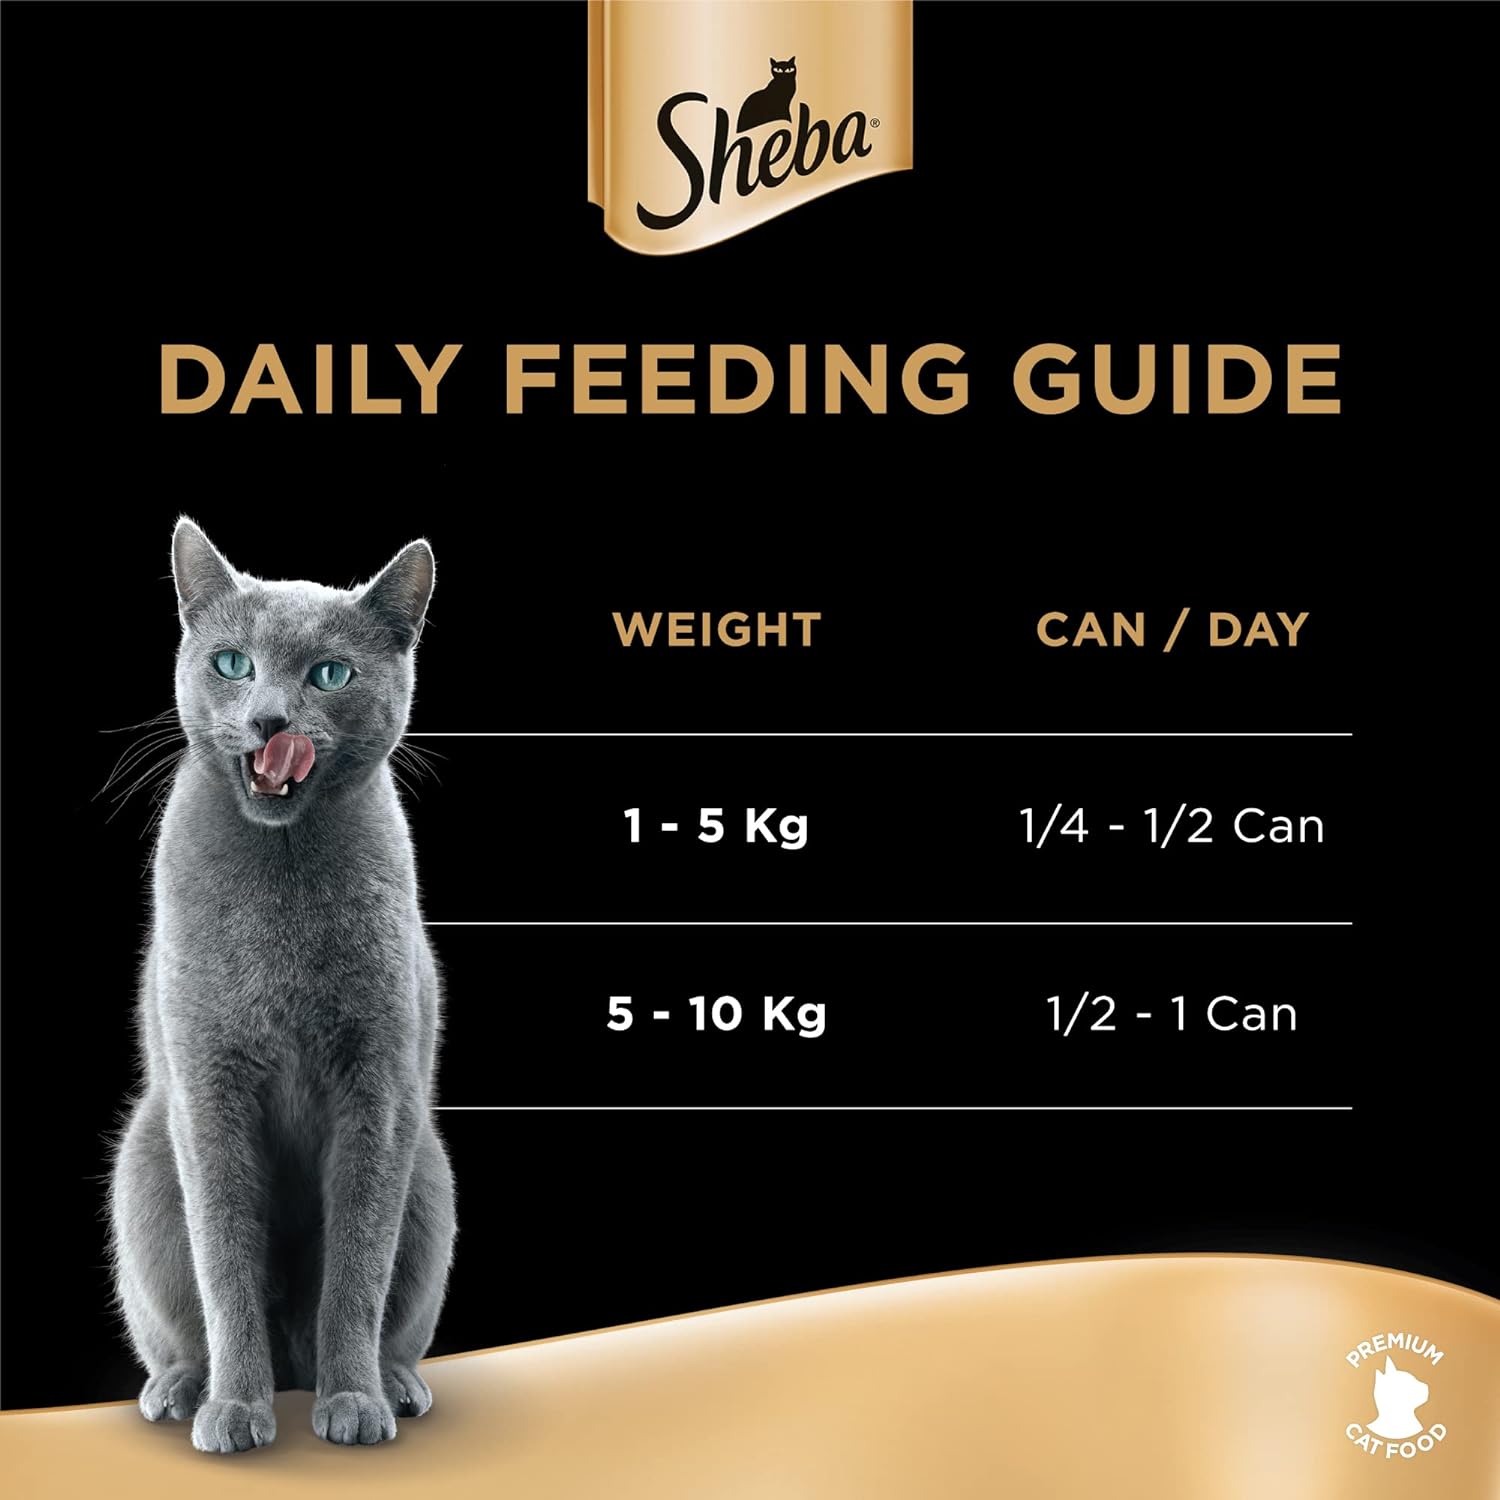 Sheba Wet Cat Food Canned Delicious Chicken Breast, Made with Natural Chicken Plus Essential Vitamins and Minerals, Sheba Wet Food Made with Grain Free Formula Suitable for Sensitive Cats, 6 x 85g